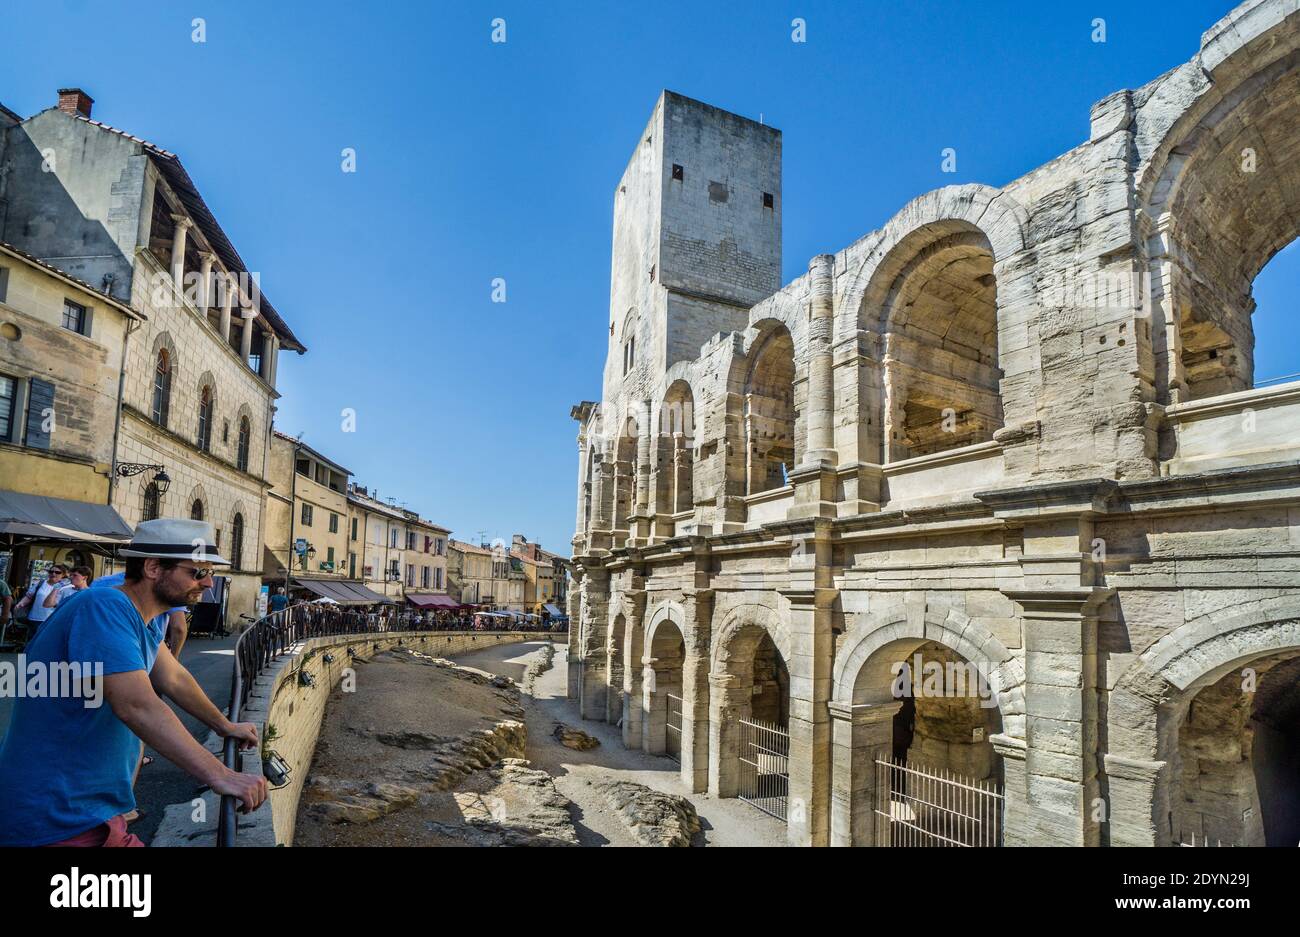 Arènes d'Arles, the Roman amphitheatre in the city of Arles, Bouches-du-Rhône department, Southern France Stock Photo